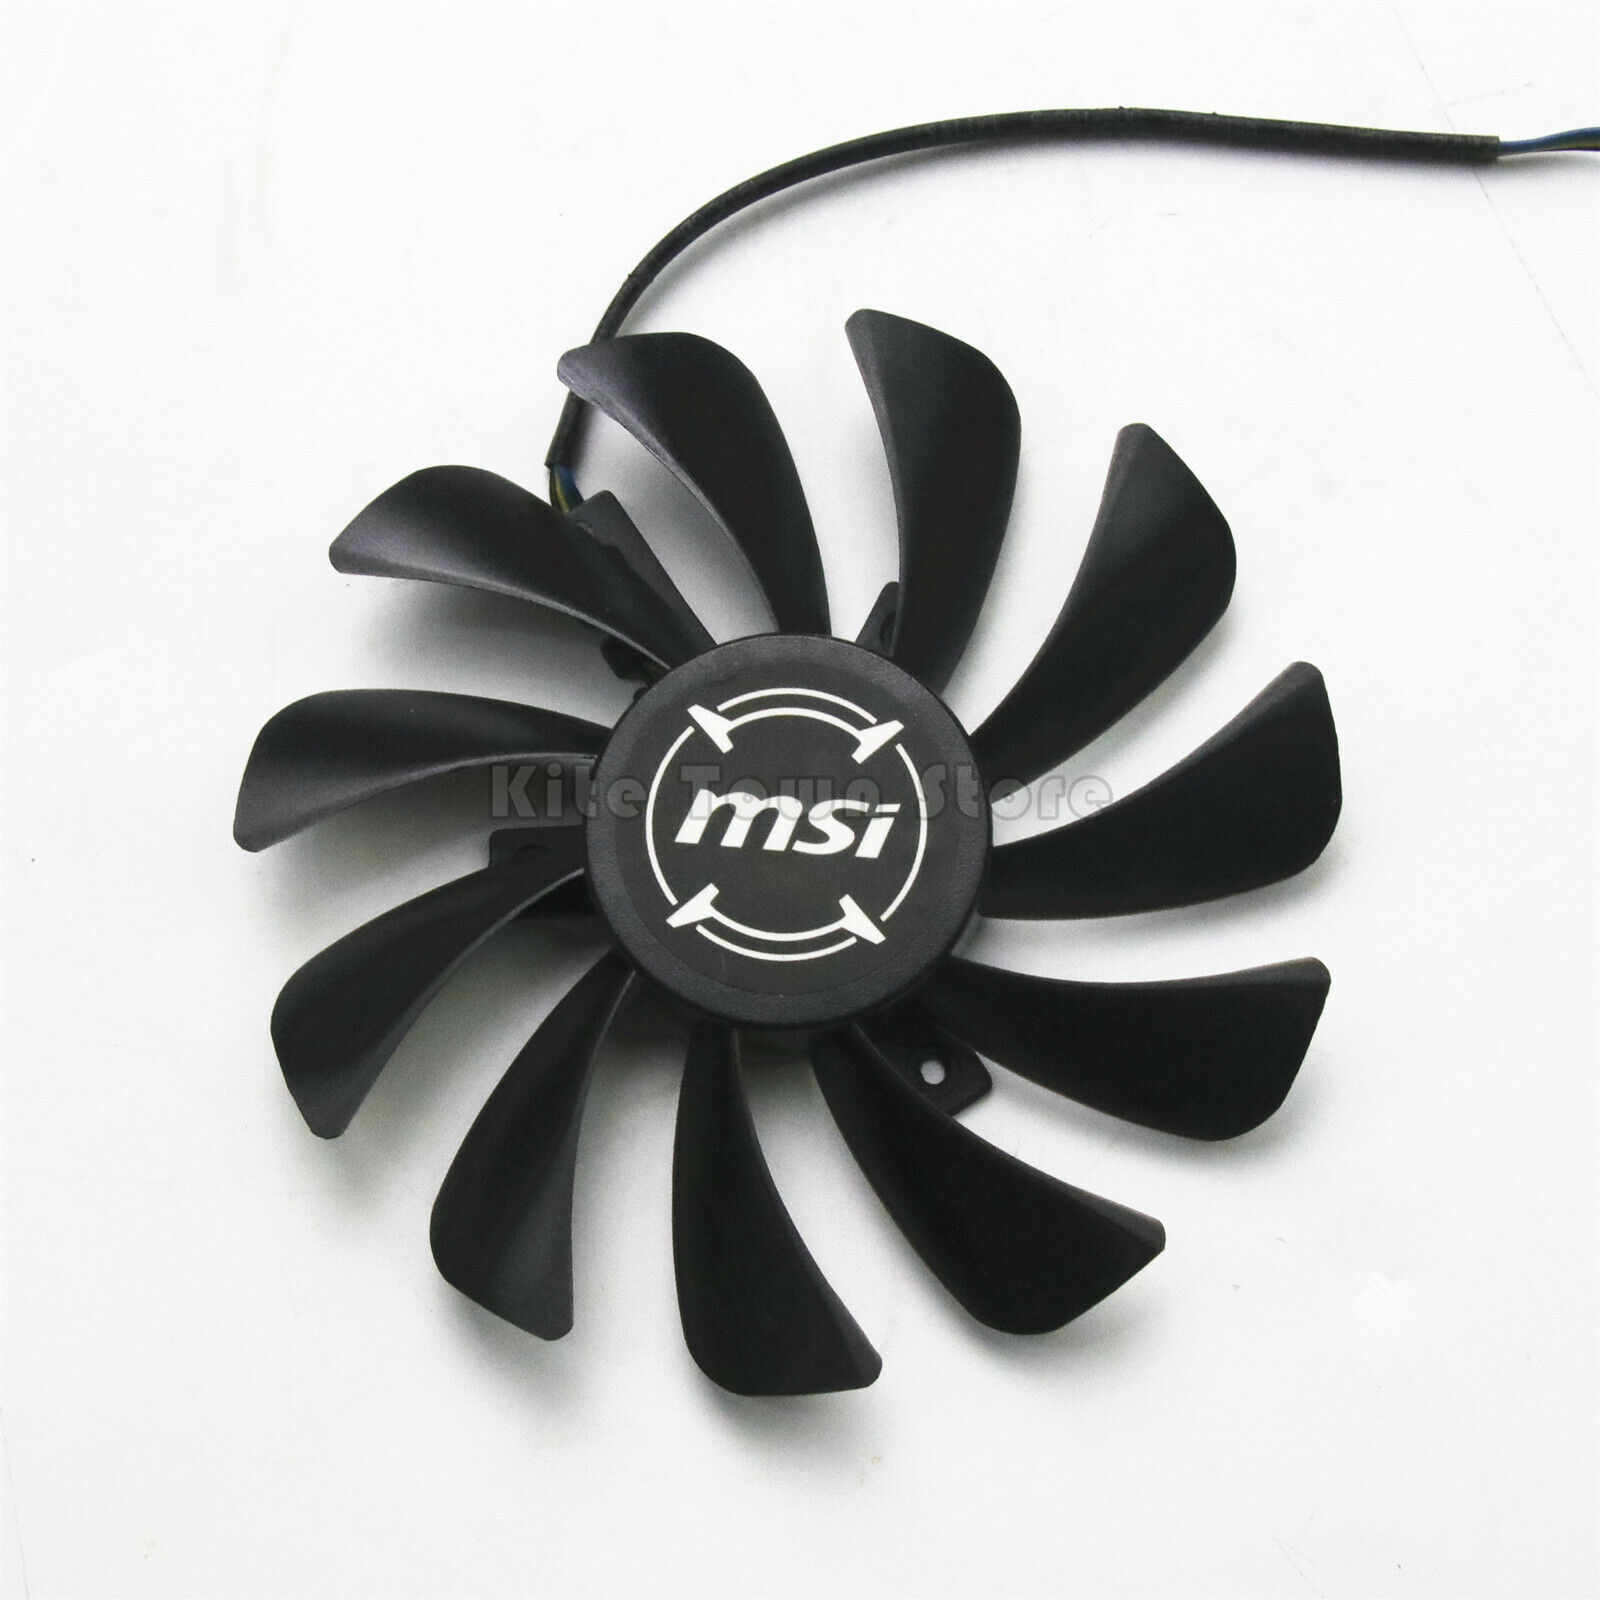 Graphics Card Cooling fan for MSI GTX1080Ti/1070/1060 RX470/480/570 GAMING 4pin 